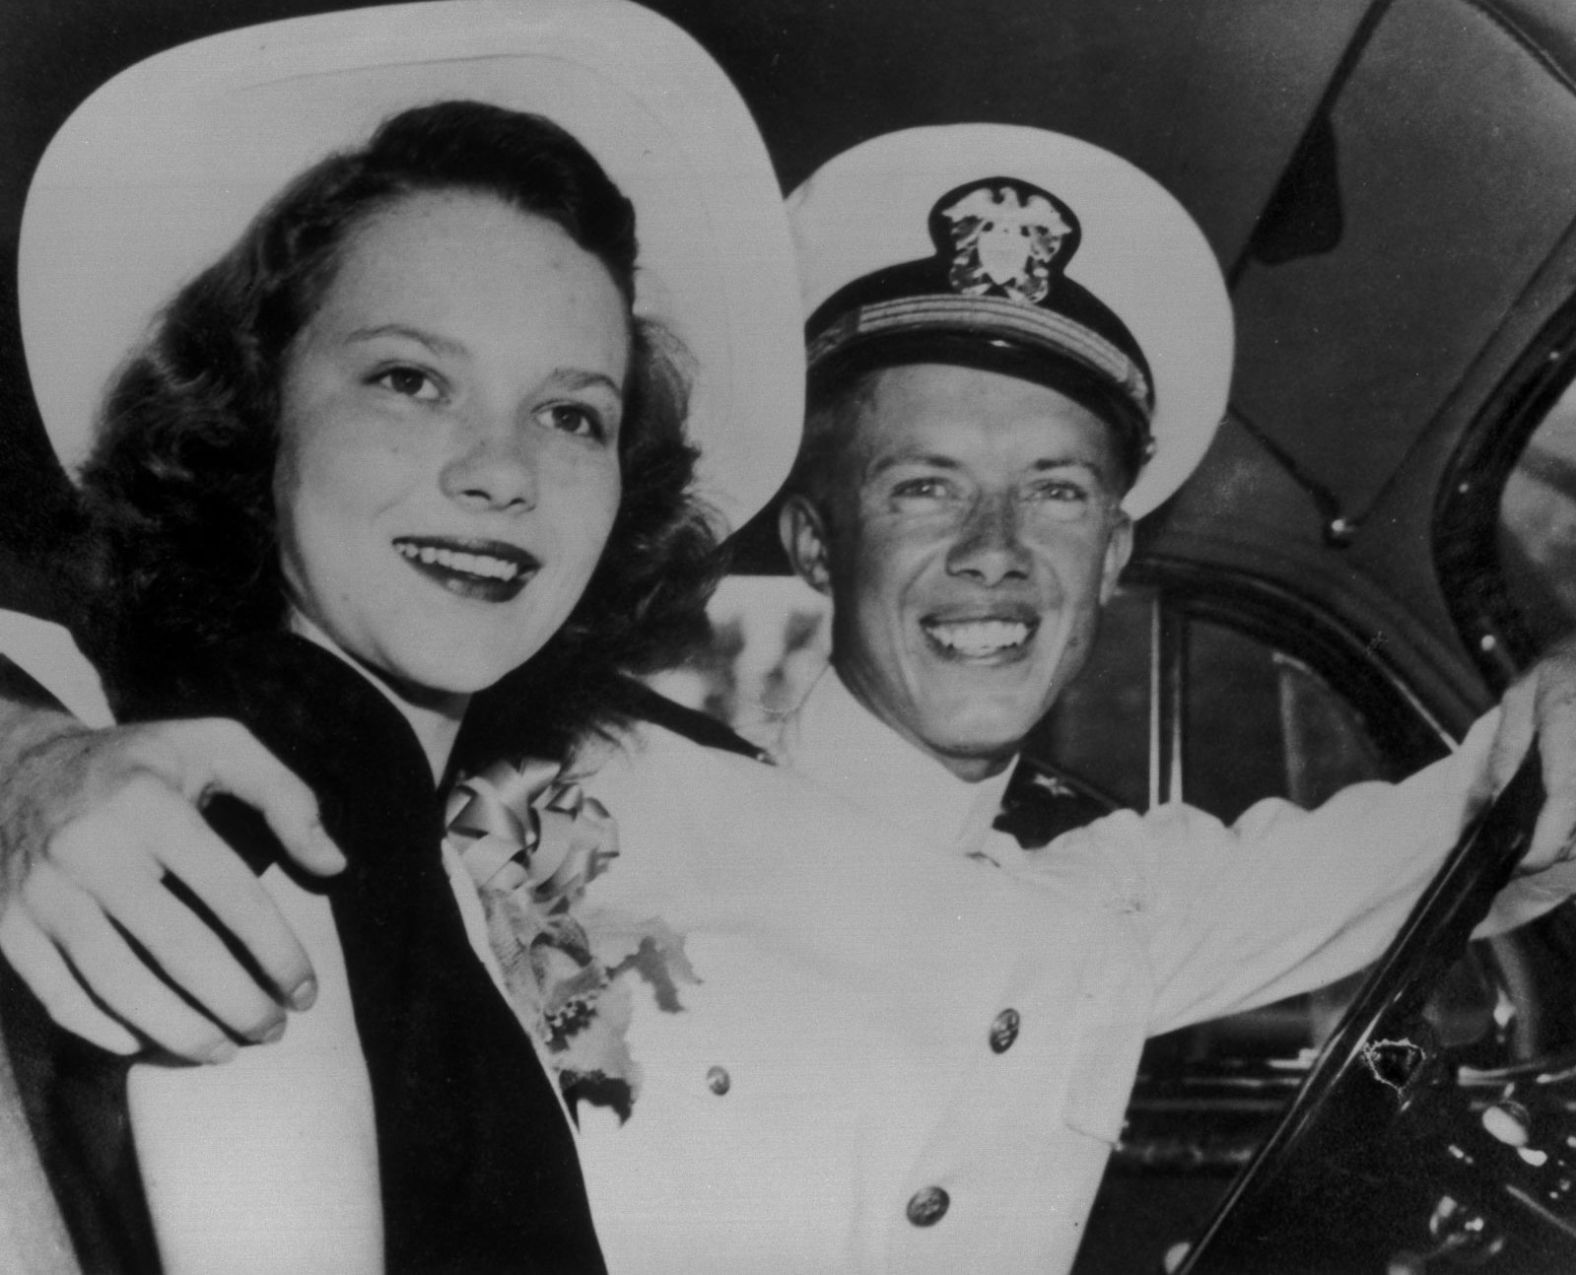 Carter and his wife, Rosalynn, are seen on their wedding day in July 1946.